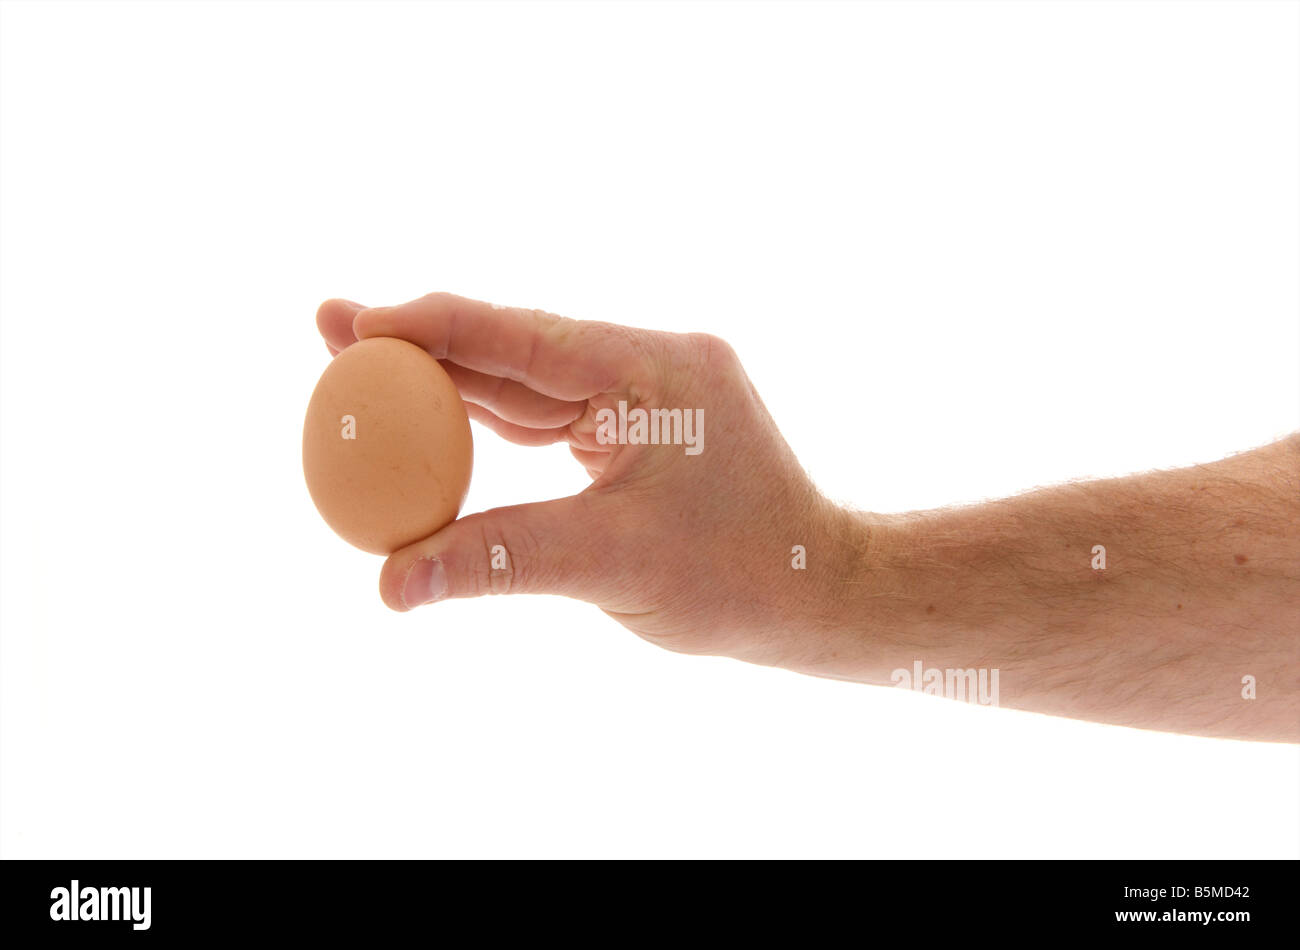 mans male right outstretched hand holding a chicken egg against a white background Stock Photo